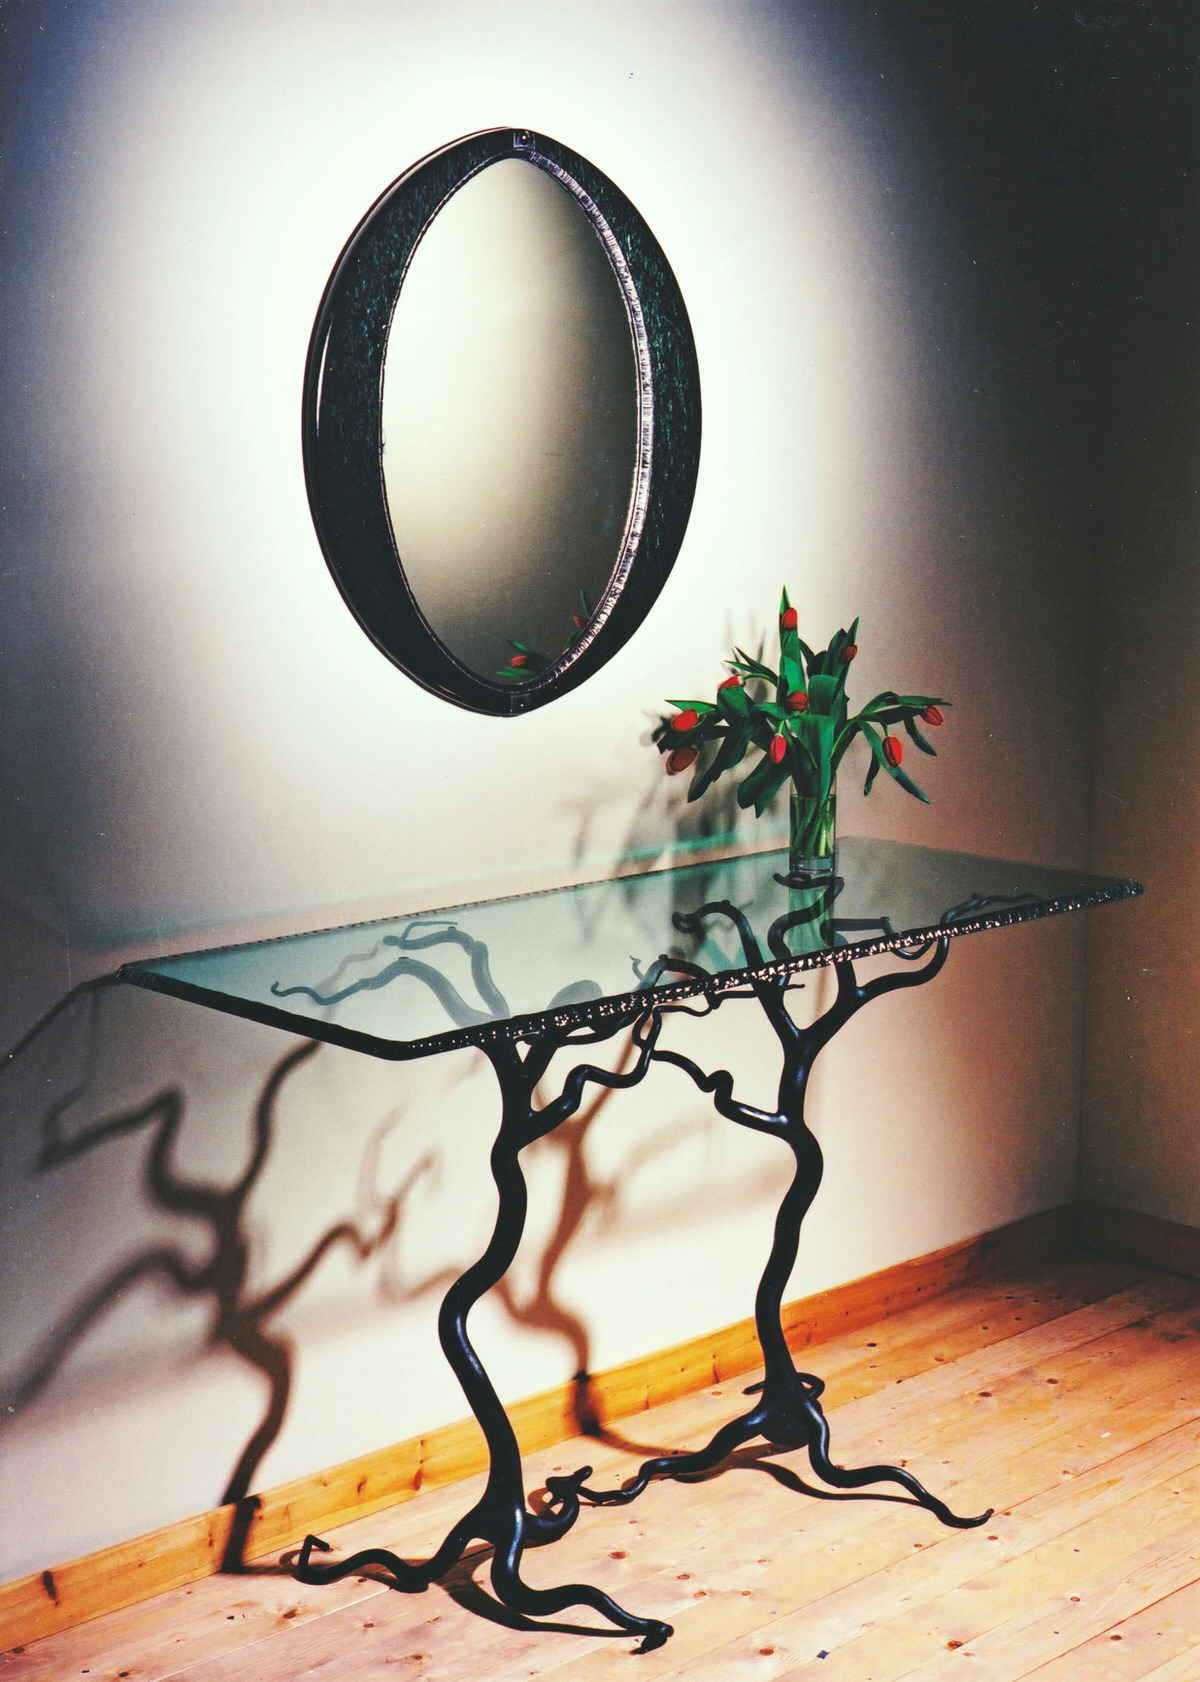 Savernake Forest Table forged steel sculptural furniture tree table by Mark Reed